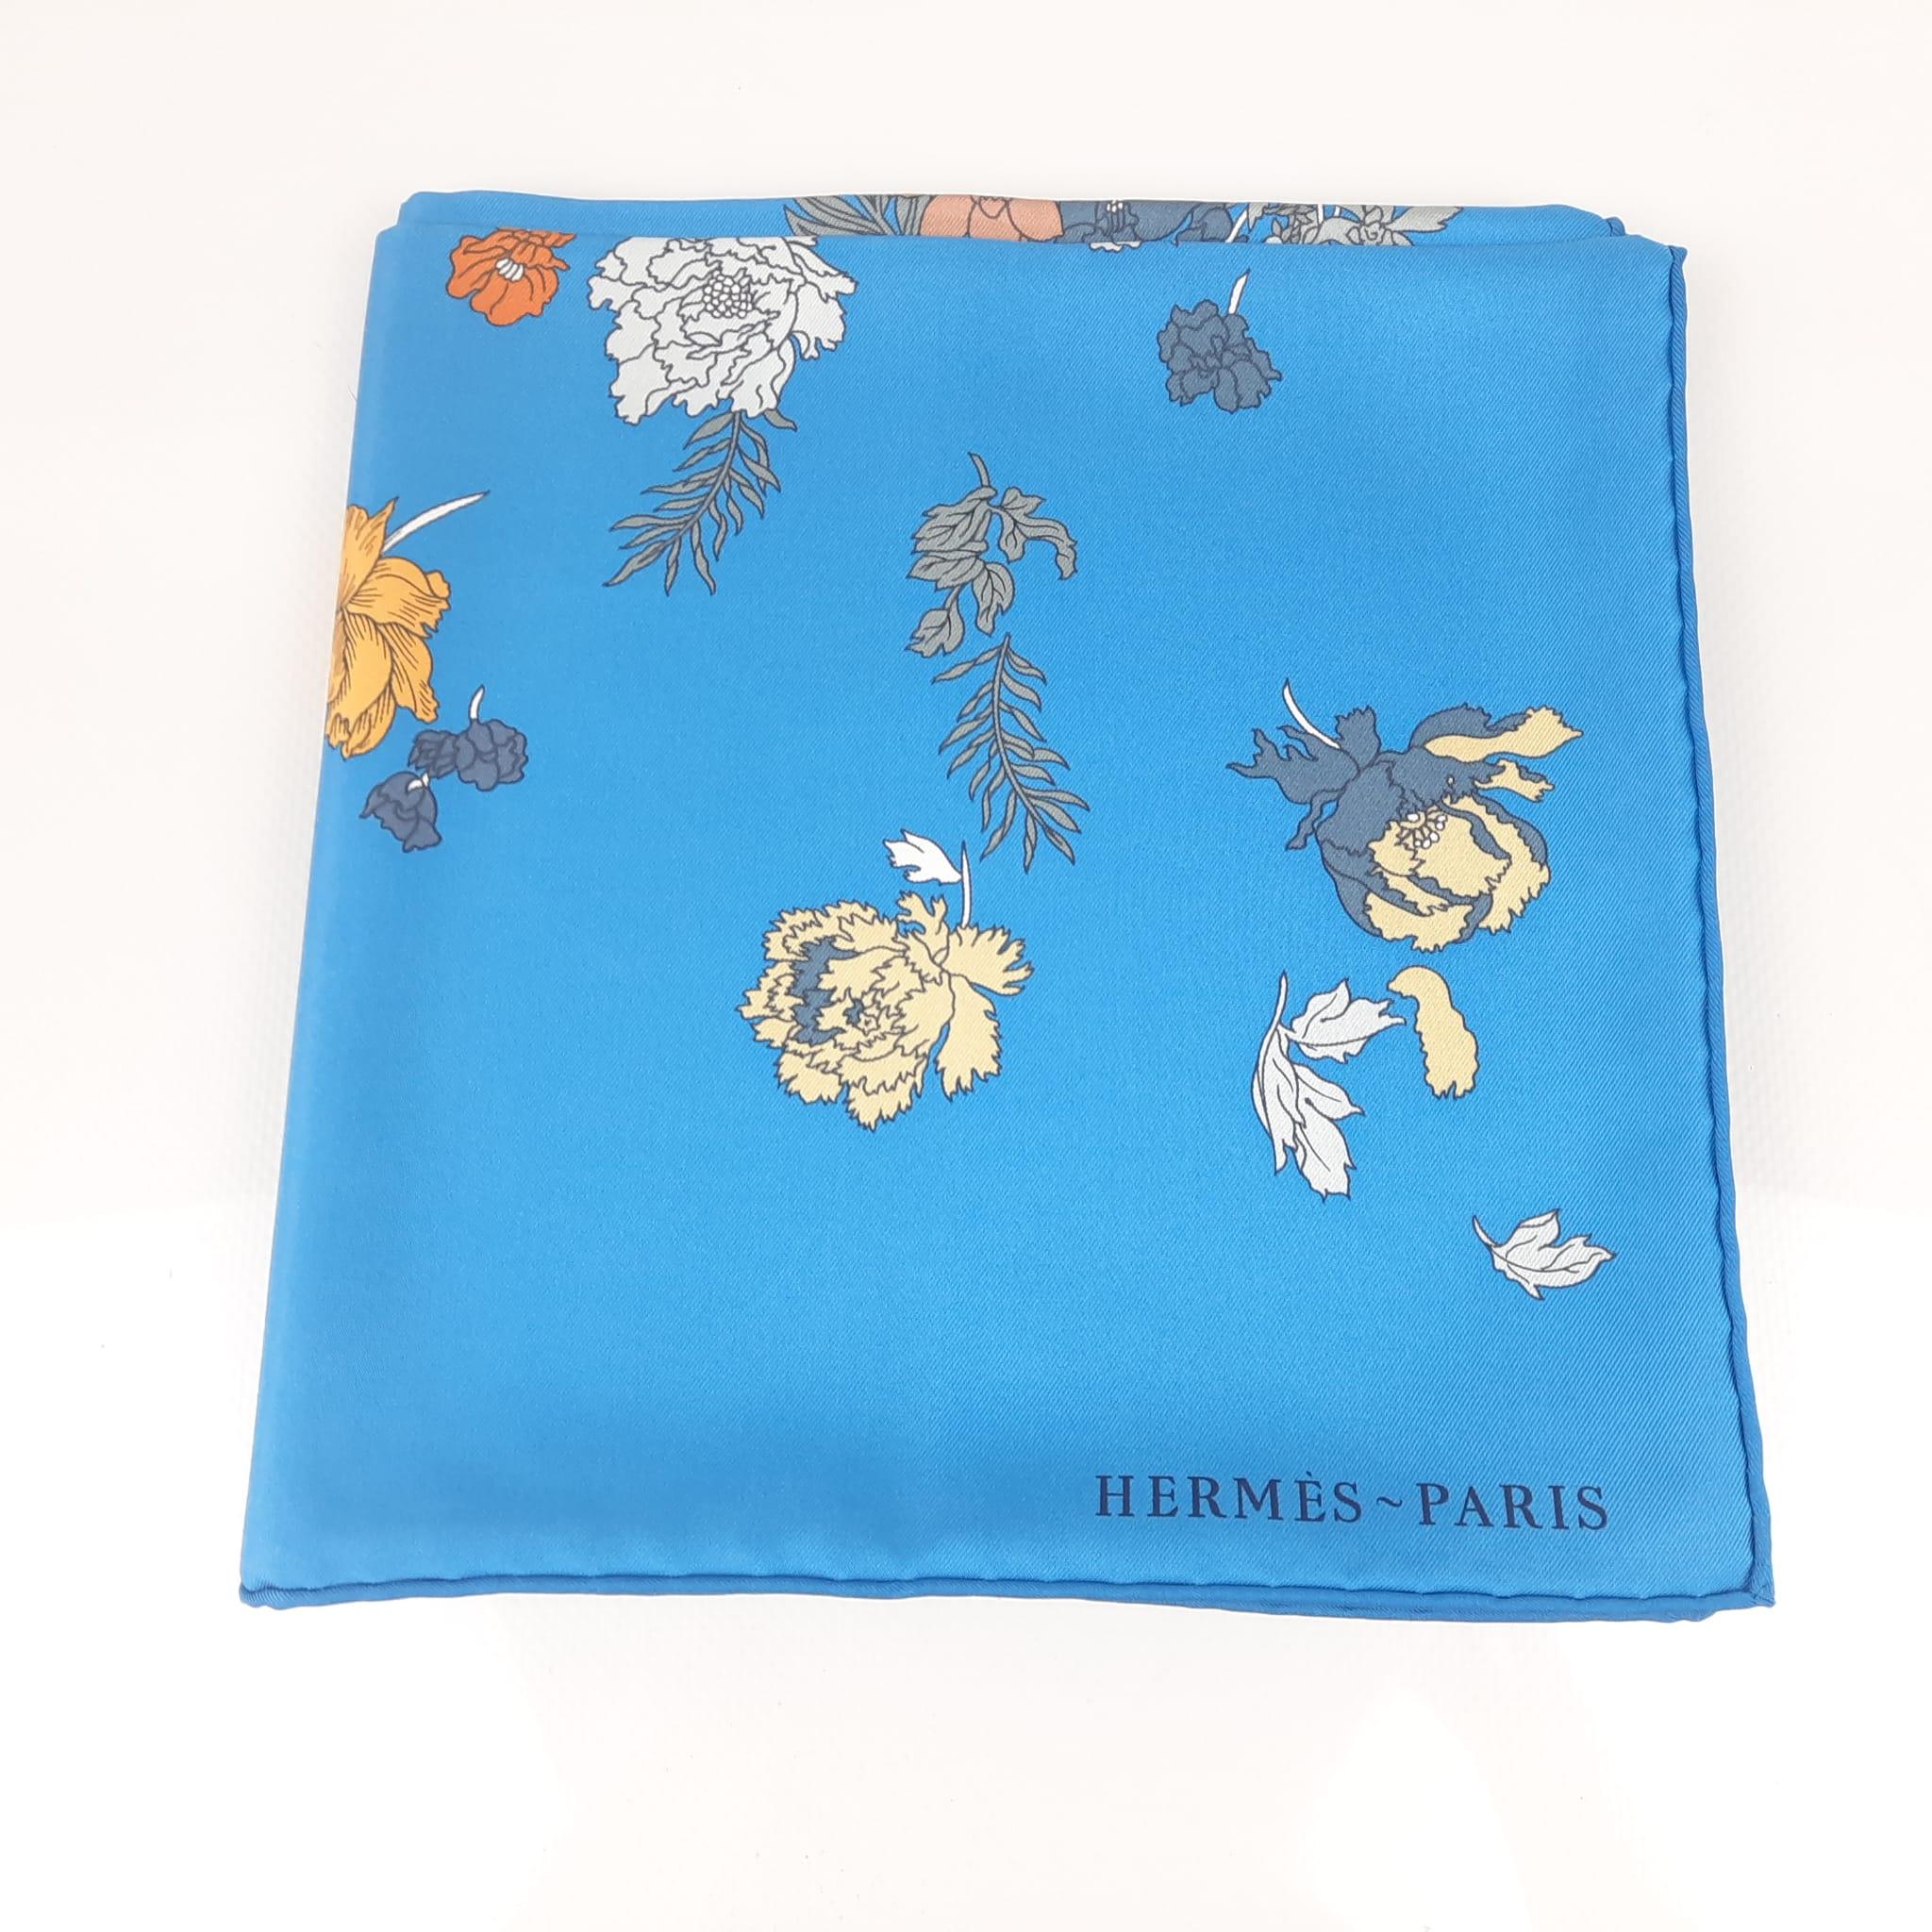 Scarf in silk twill with hand-rolled edges.
The Hermès scarf is an infinite source of creativity and storytelling that constantly evolves thanks to the new designs and color combinations offered each season.
This essential Hermès accessory